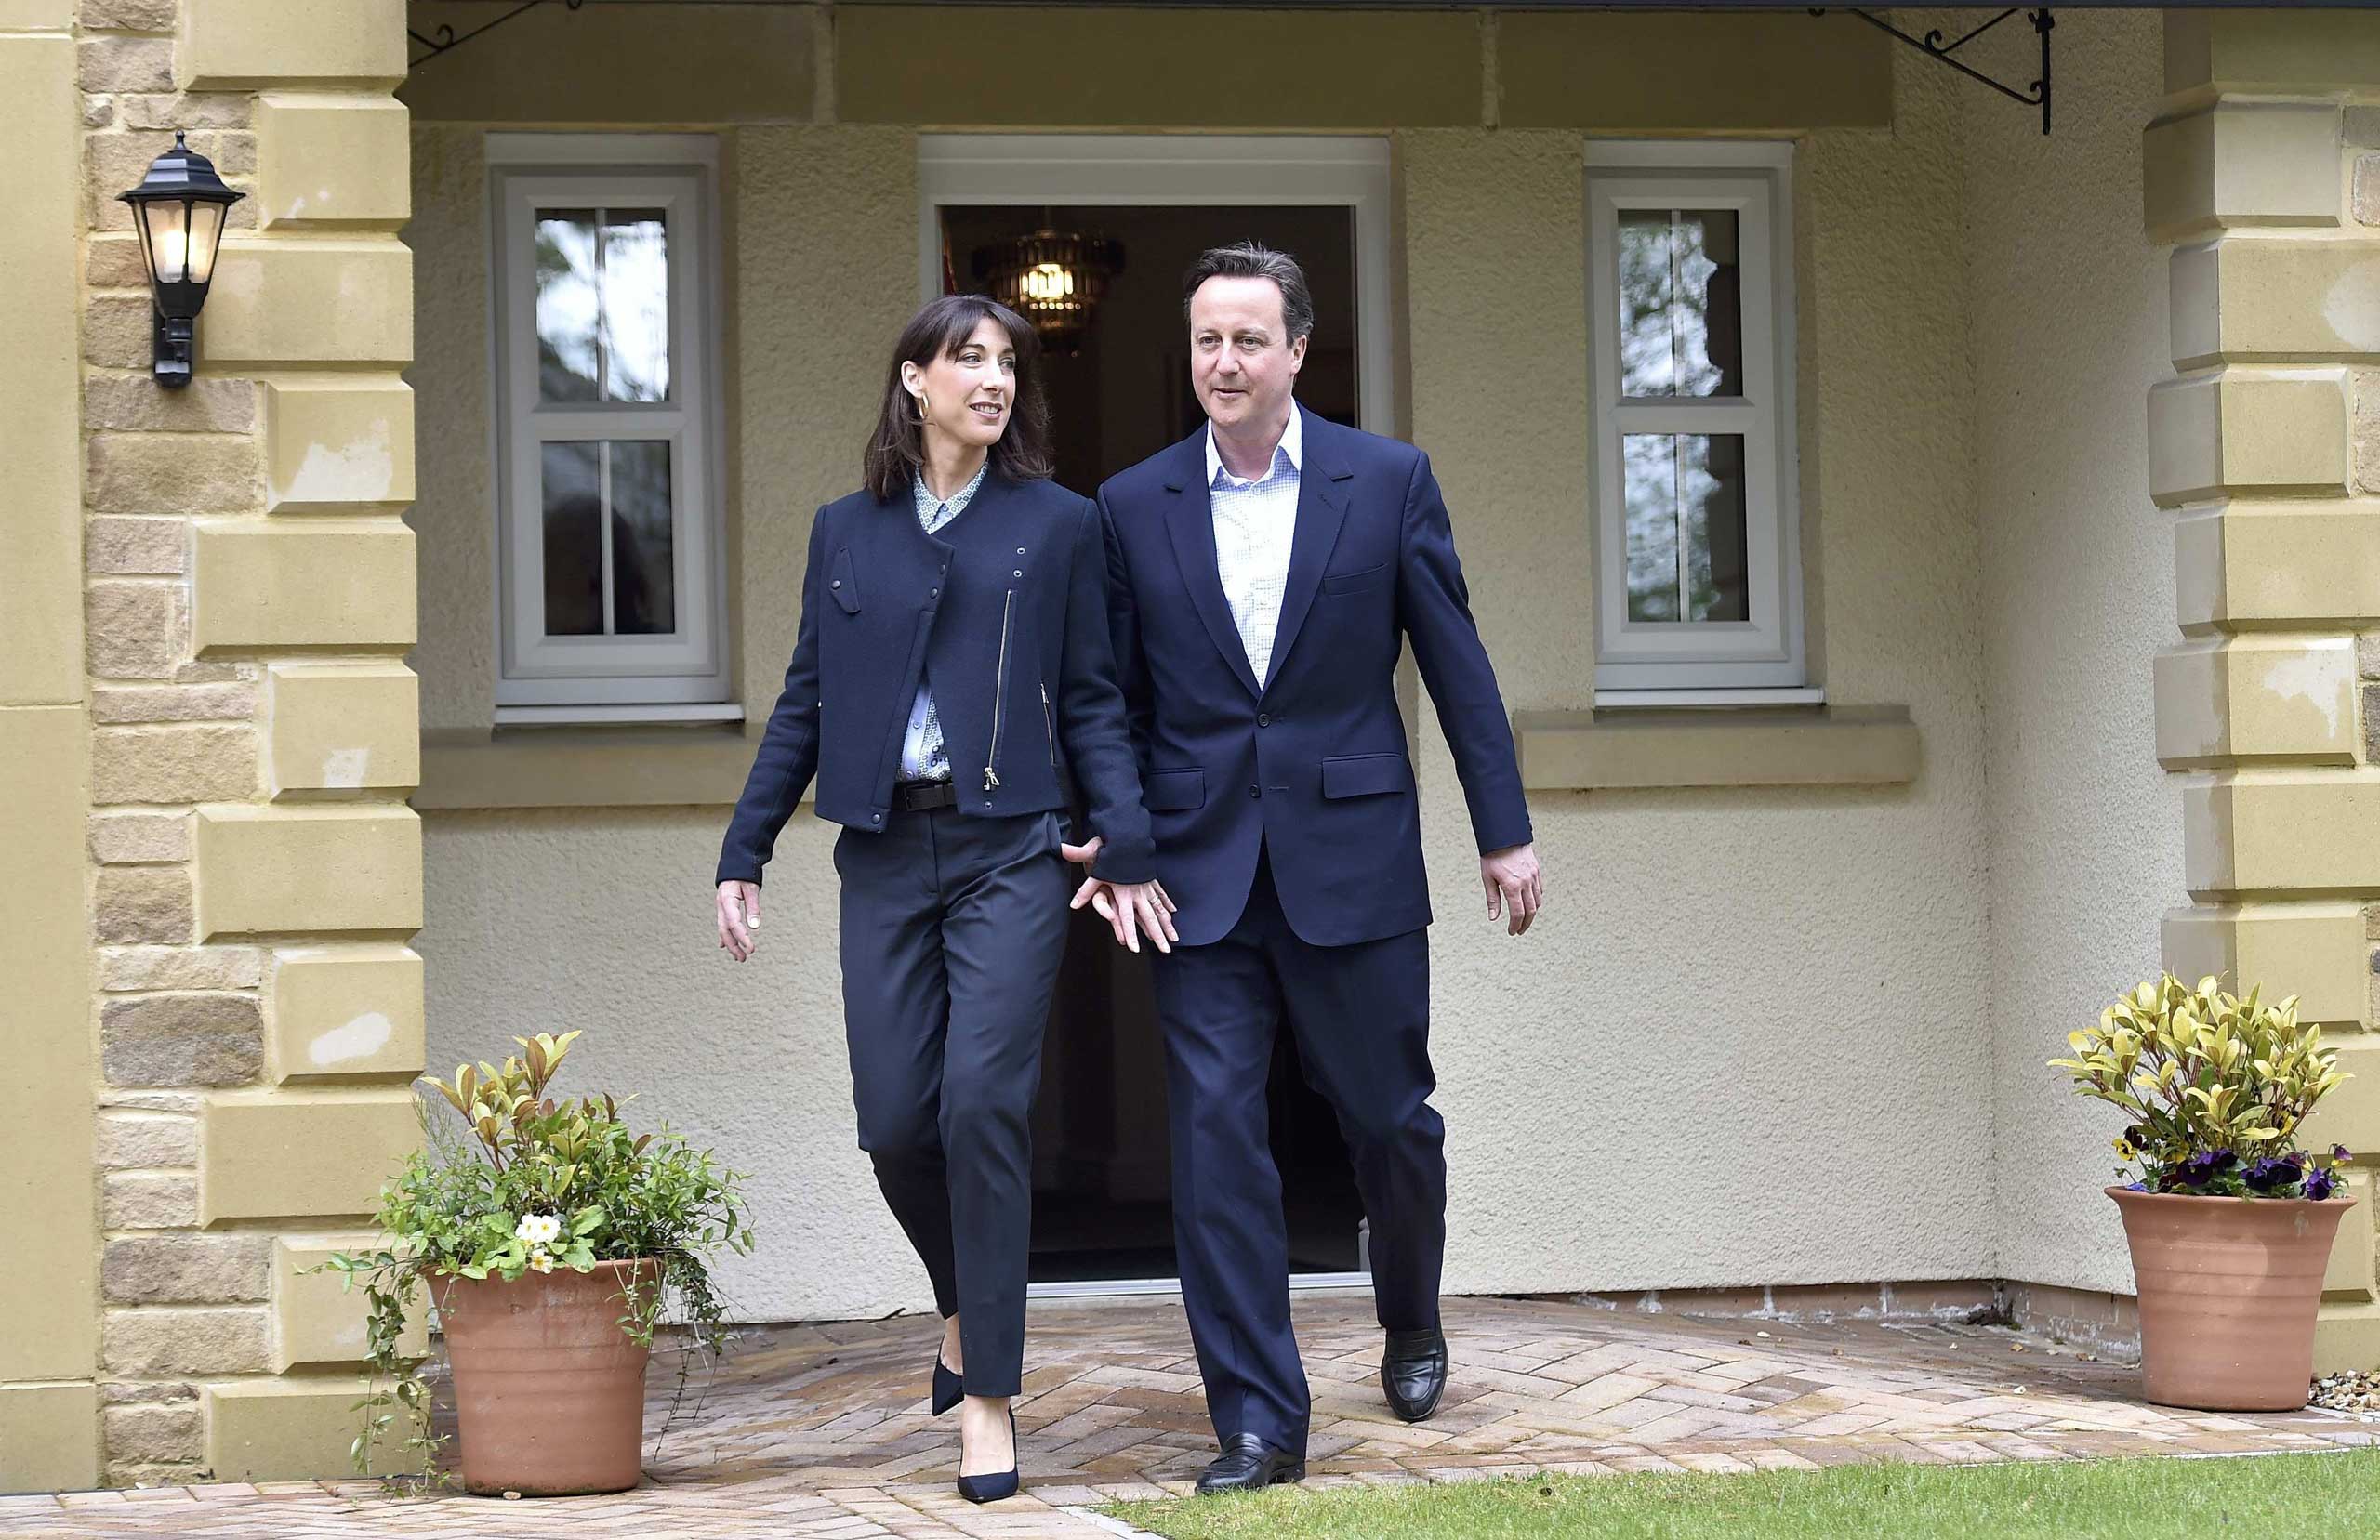 Prime Minister David Cameron and his wife Samantha during a campaign visit to a home-building scheme on May 6, 2015, in Lancaster, England (Toby Melville—WPA Pool/Getty Images)